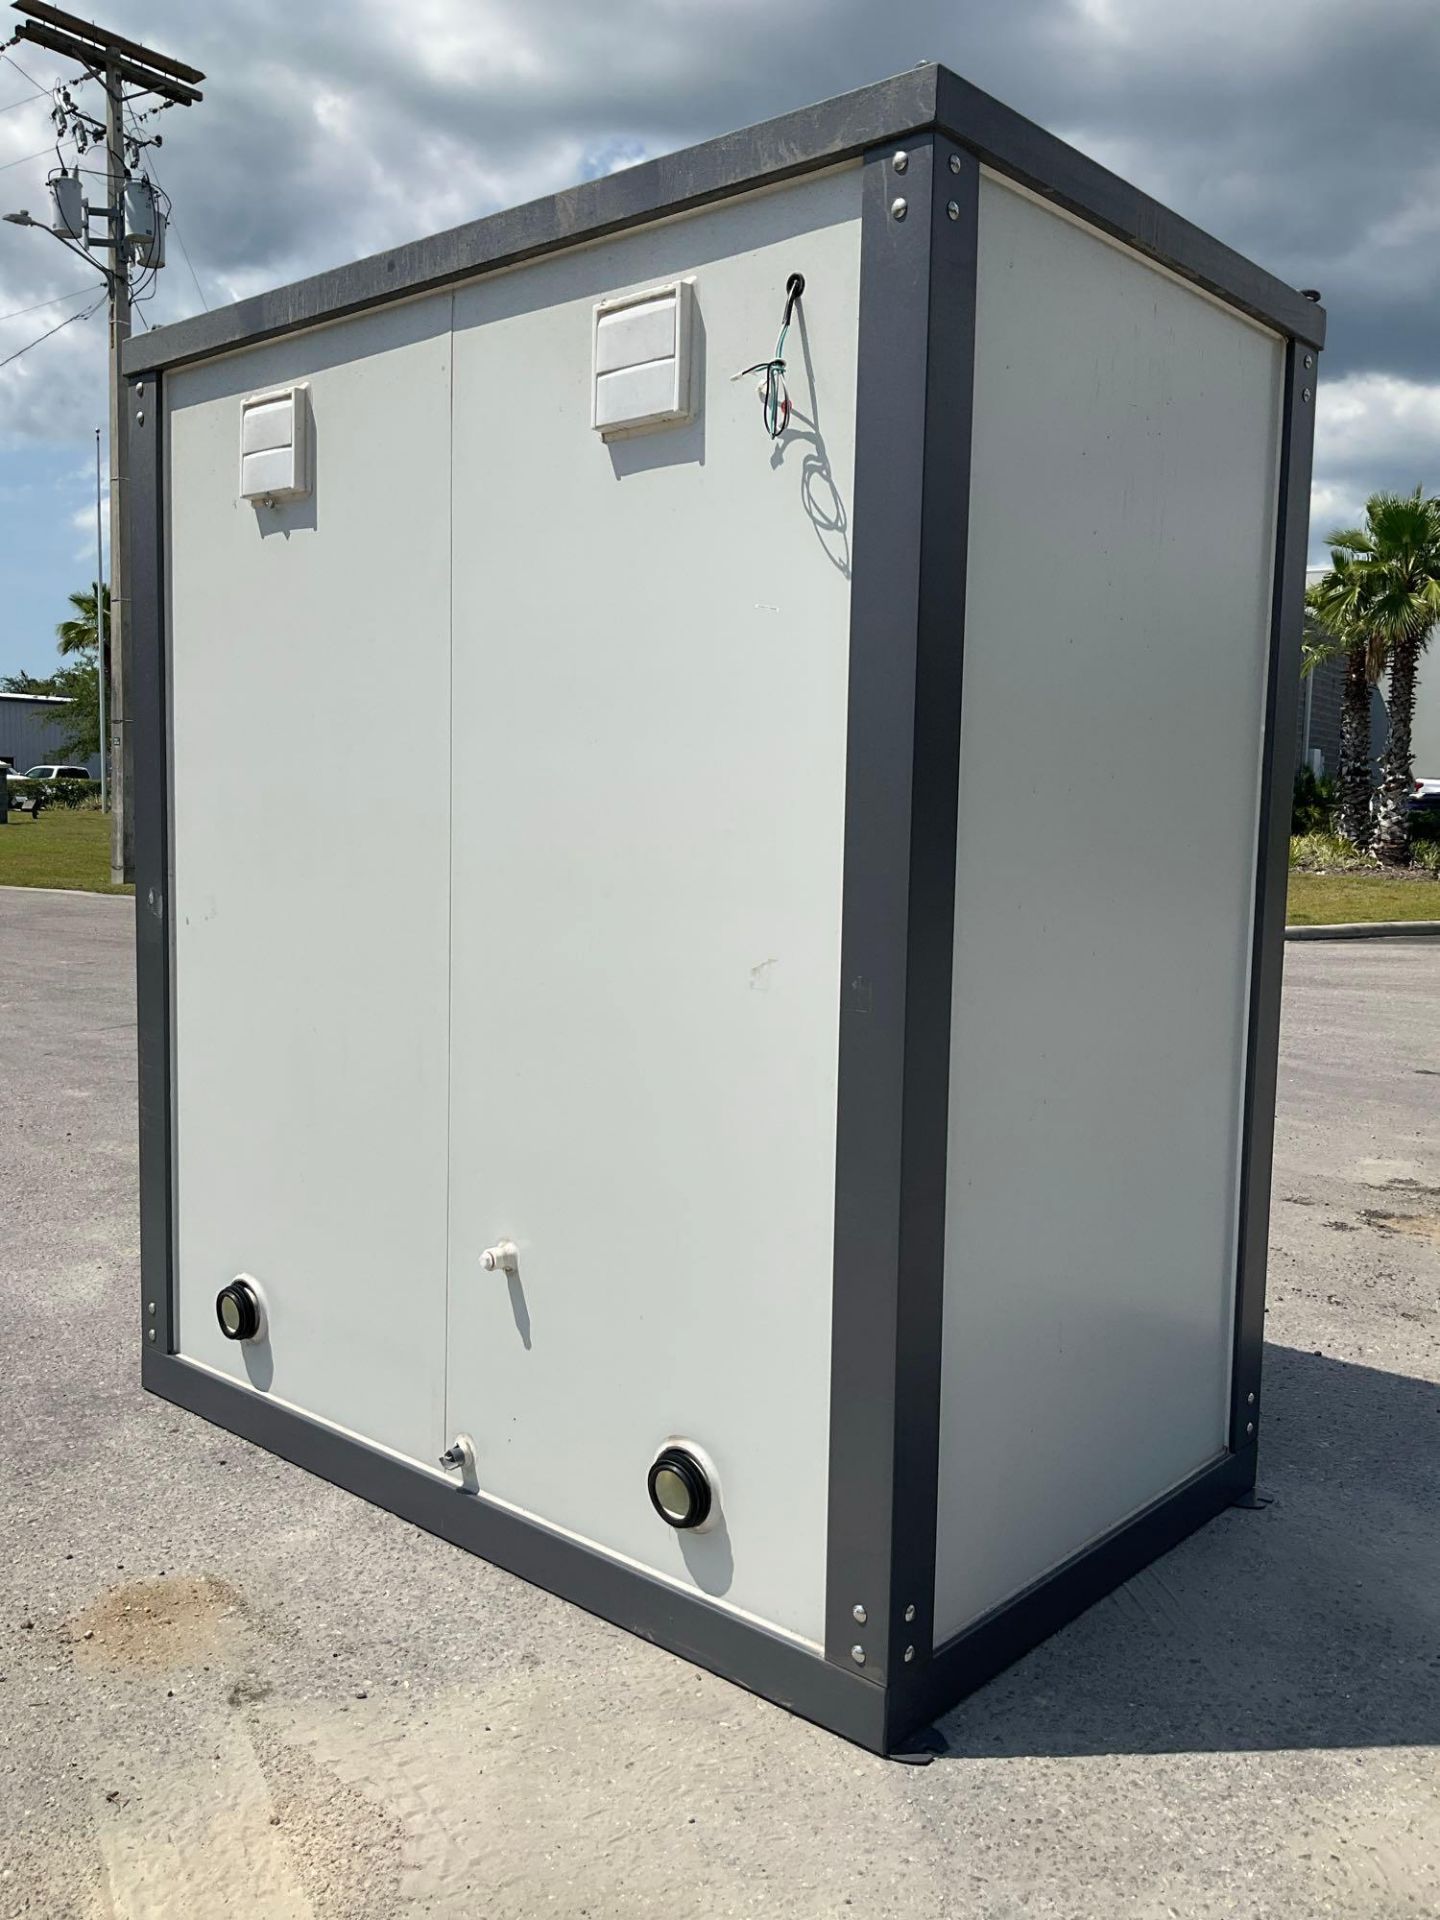 UNUSED PORTABLE DOUBLE BATHROOM UNIT, 2 STALLS, ELECTRIC & PLUMBING HOOK UP WITH EXTERIOR PLUMBIN... - Image 2 of 12